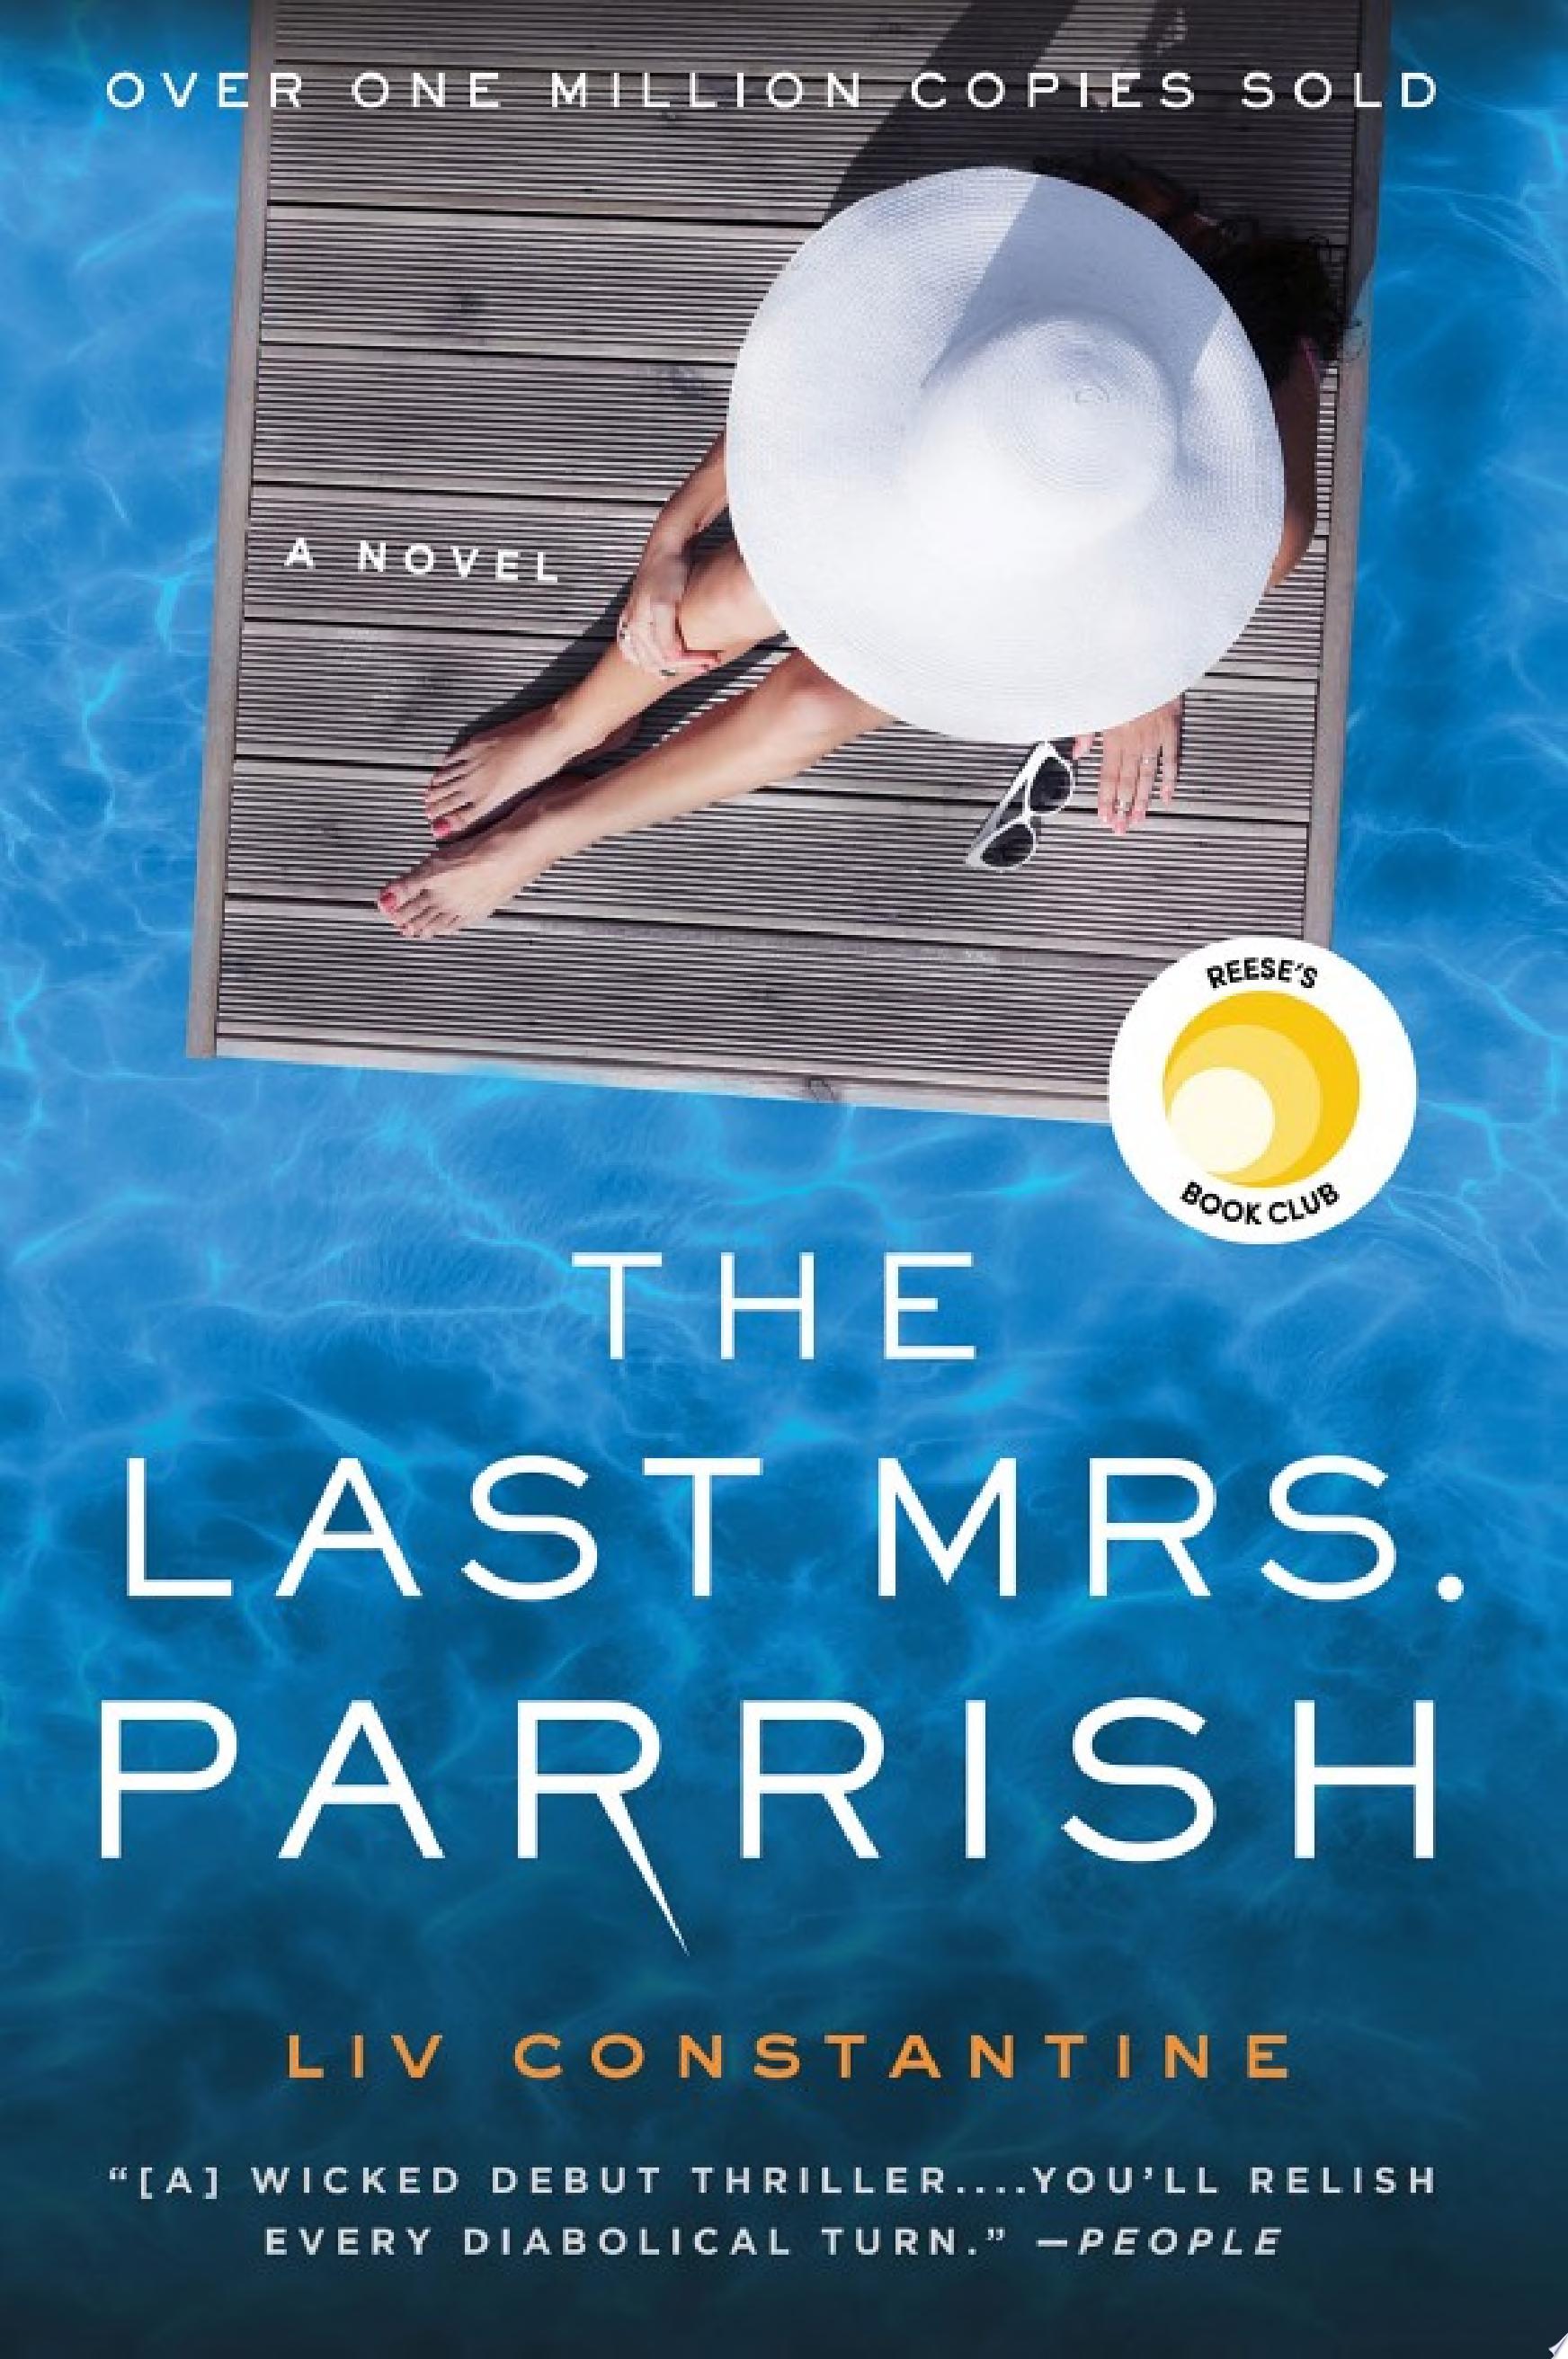 Image for "The Last Mrs. Parrish"